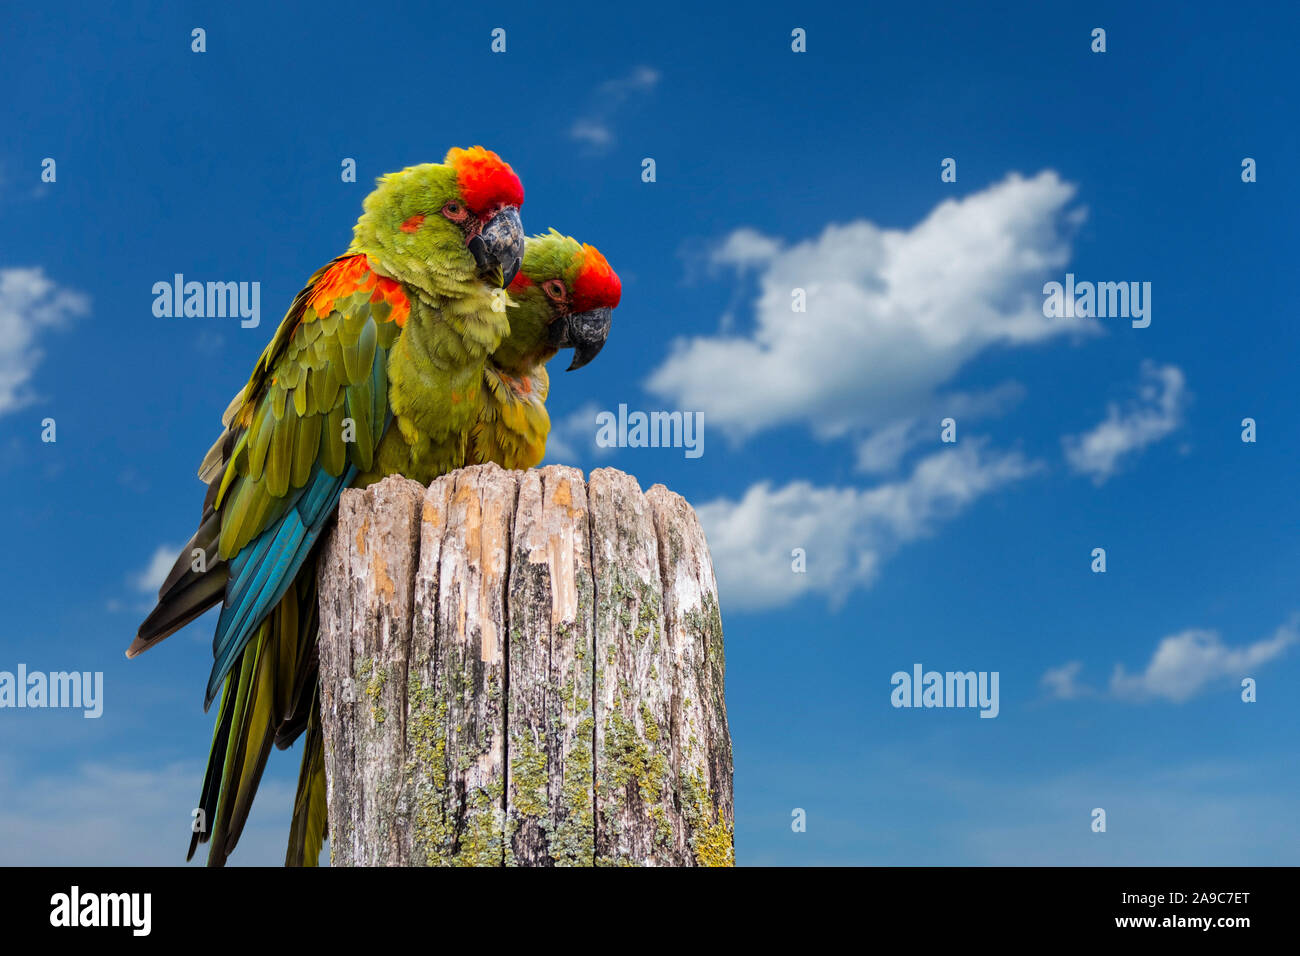 Red-fronted macaw / Lafresnaye's macaws (Ara rubrogenys) couple native to semi-desert mountainous area of Bolivia Stock Photo